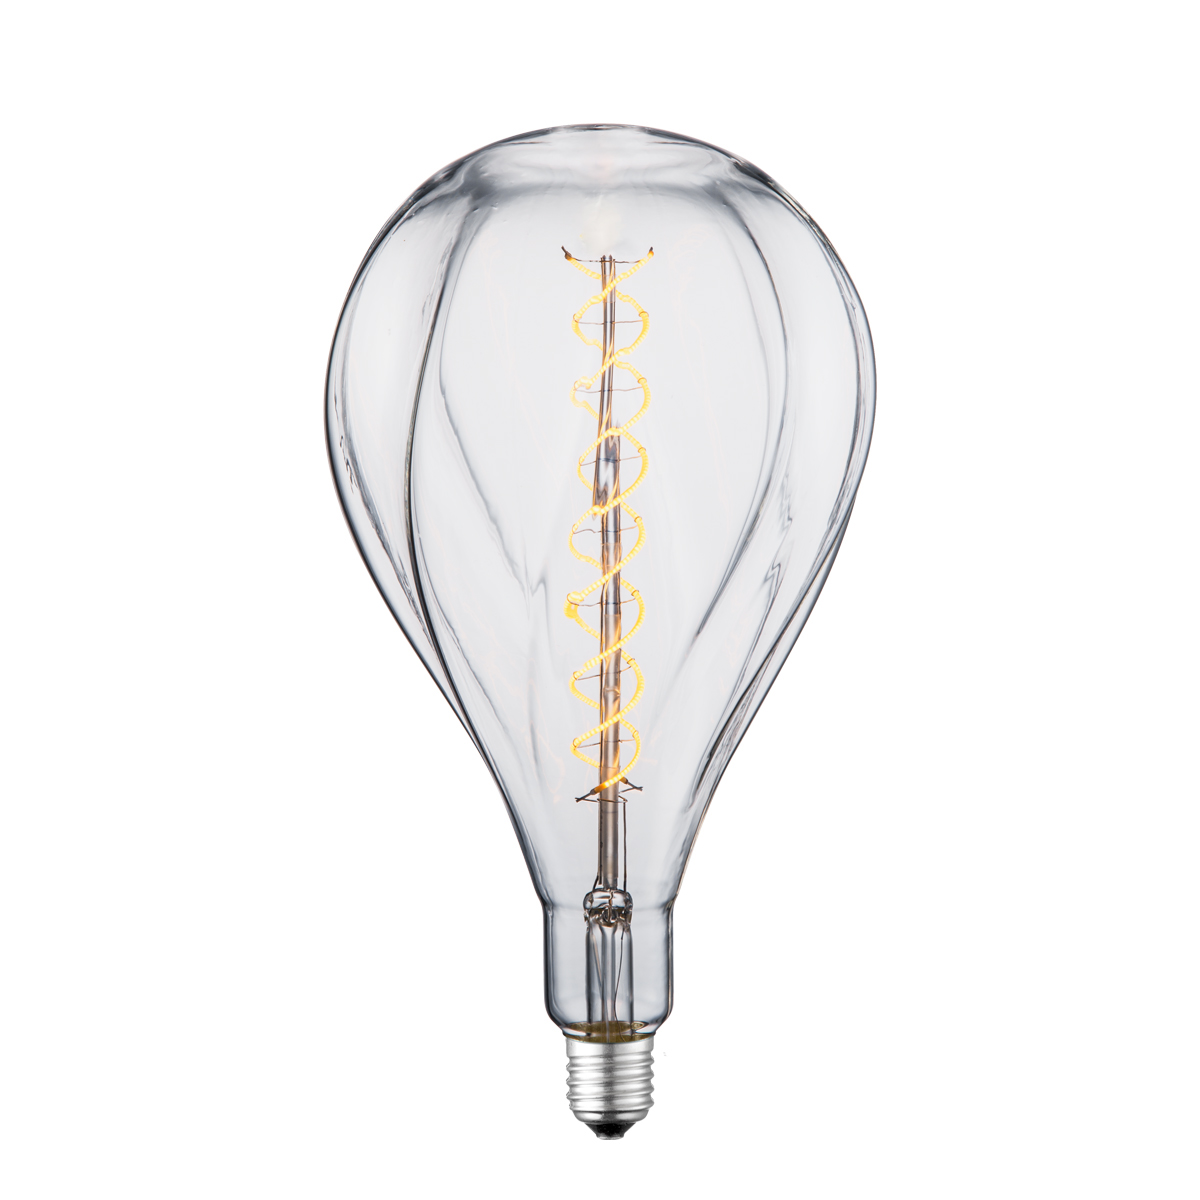 Tangla lighting - TLB-8103-06CL - LED Light Bulb Double Spiral filament - special 4W clear - large bubs - dimmable - E27